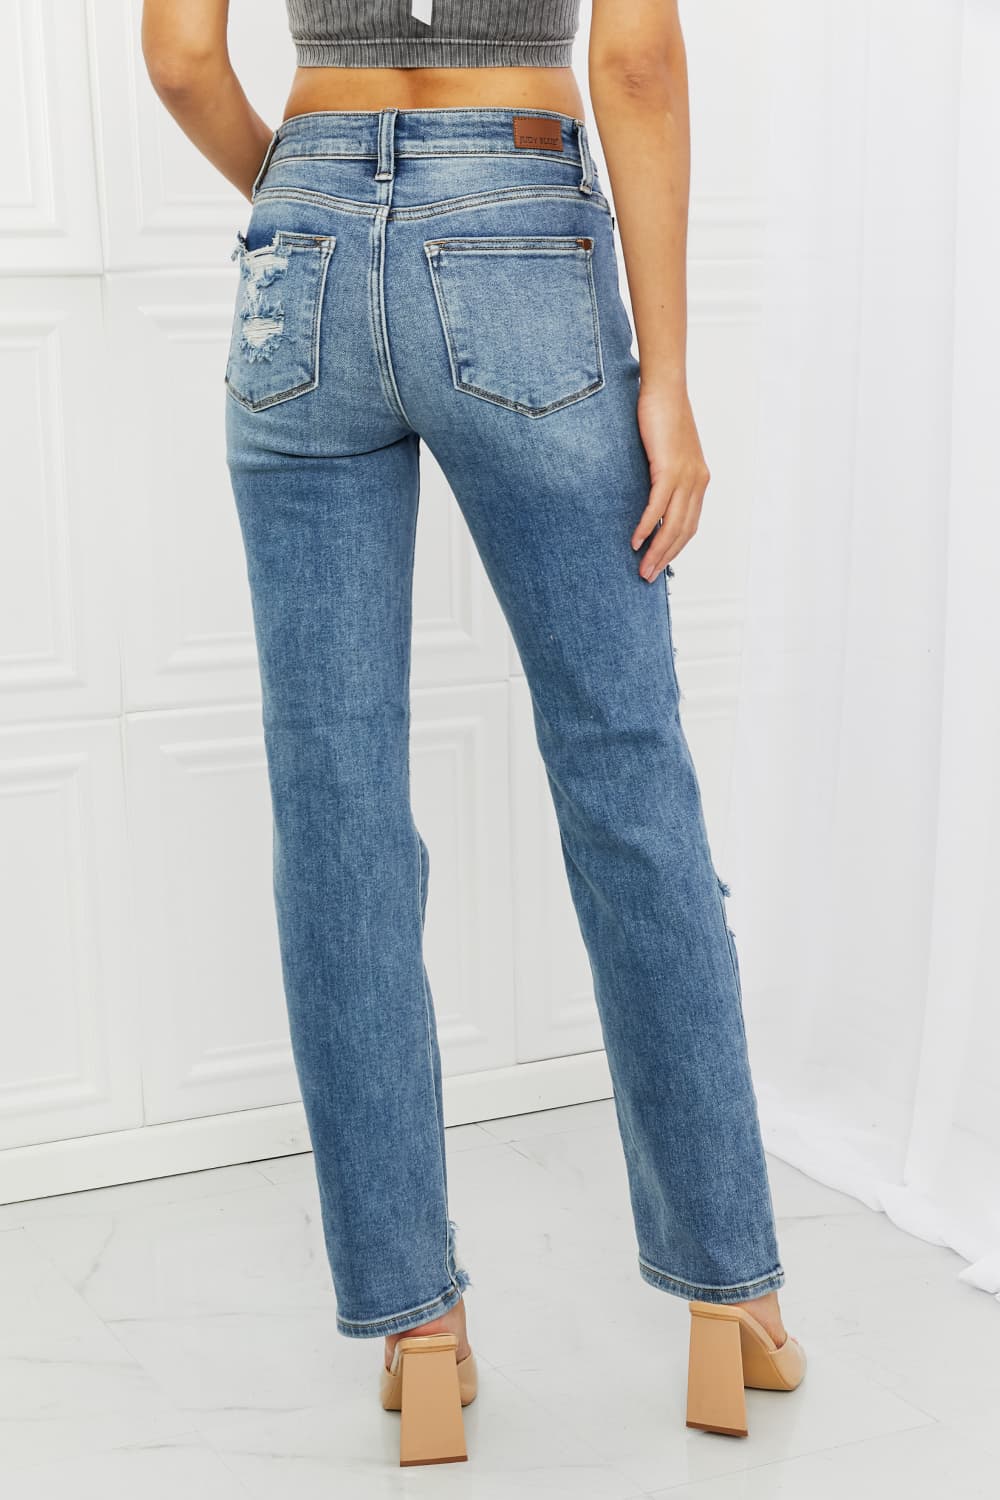 These jeans are the perfect combination of style and comfort, making them a must-have in every fashion-forward individual's wardrobe.The heavy distressing adds a touch of edginess to the classic straight-leg silhouette, making them perfect for a night out with the girls or a casual weekend brunch. 